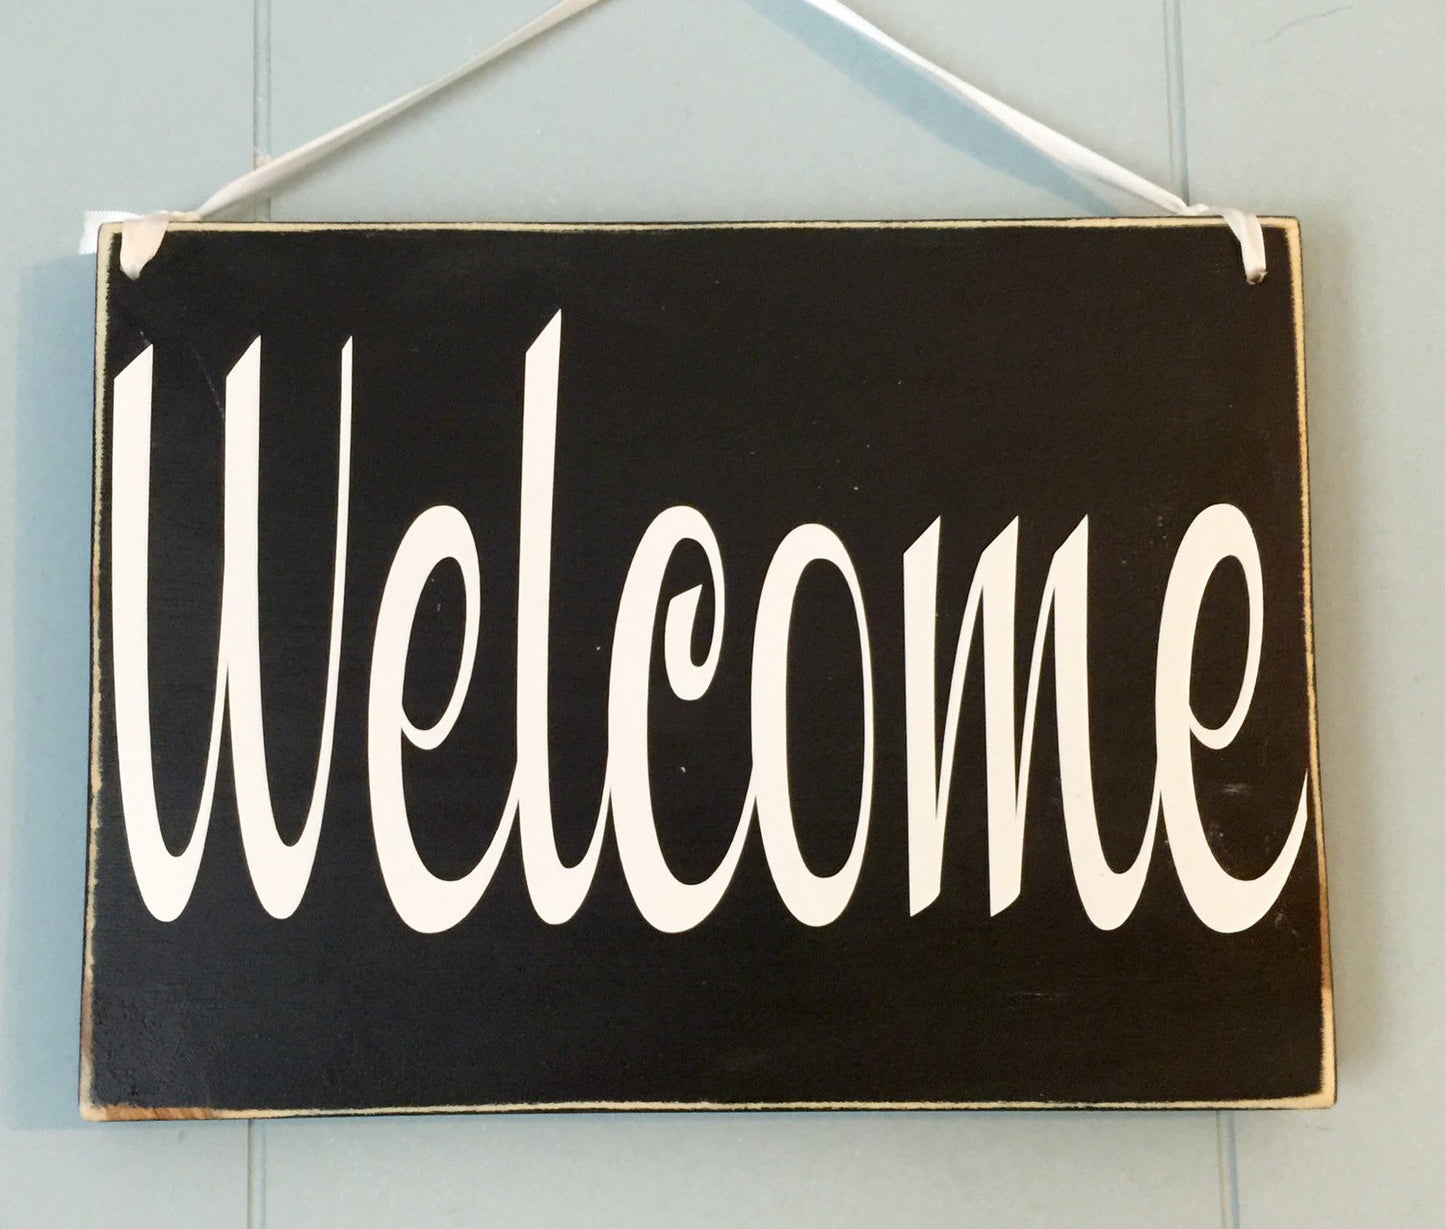 8x6 Welcome In Session Wood Sign